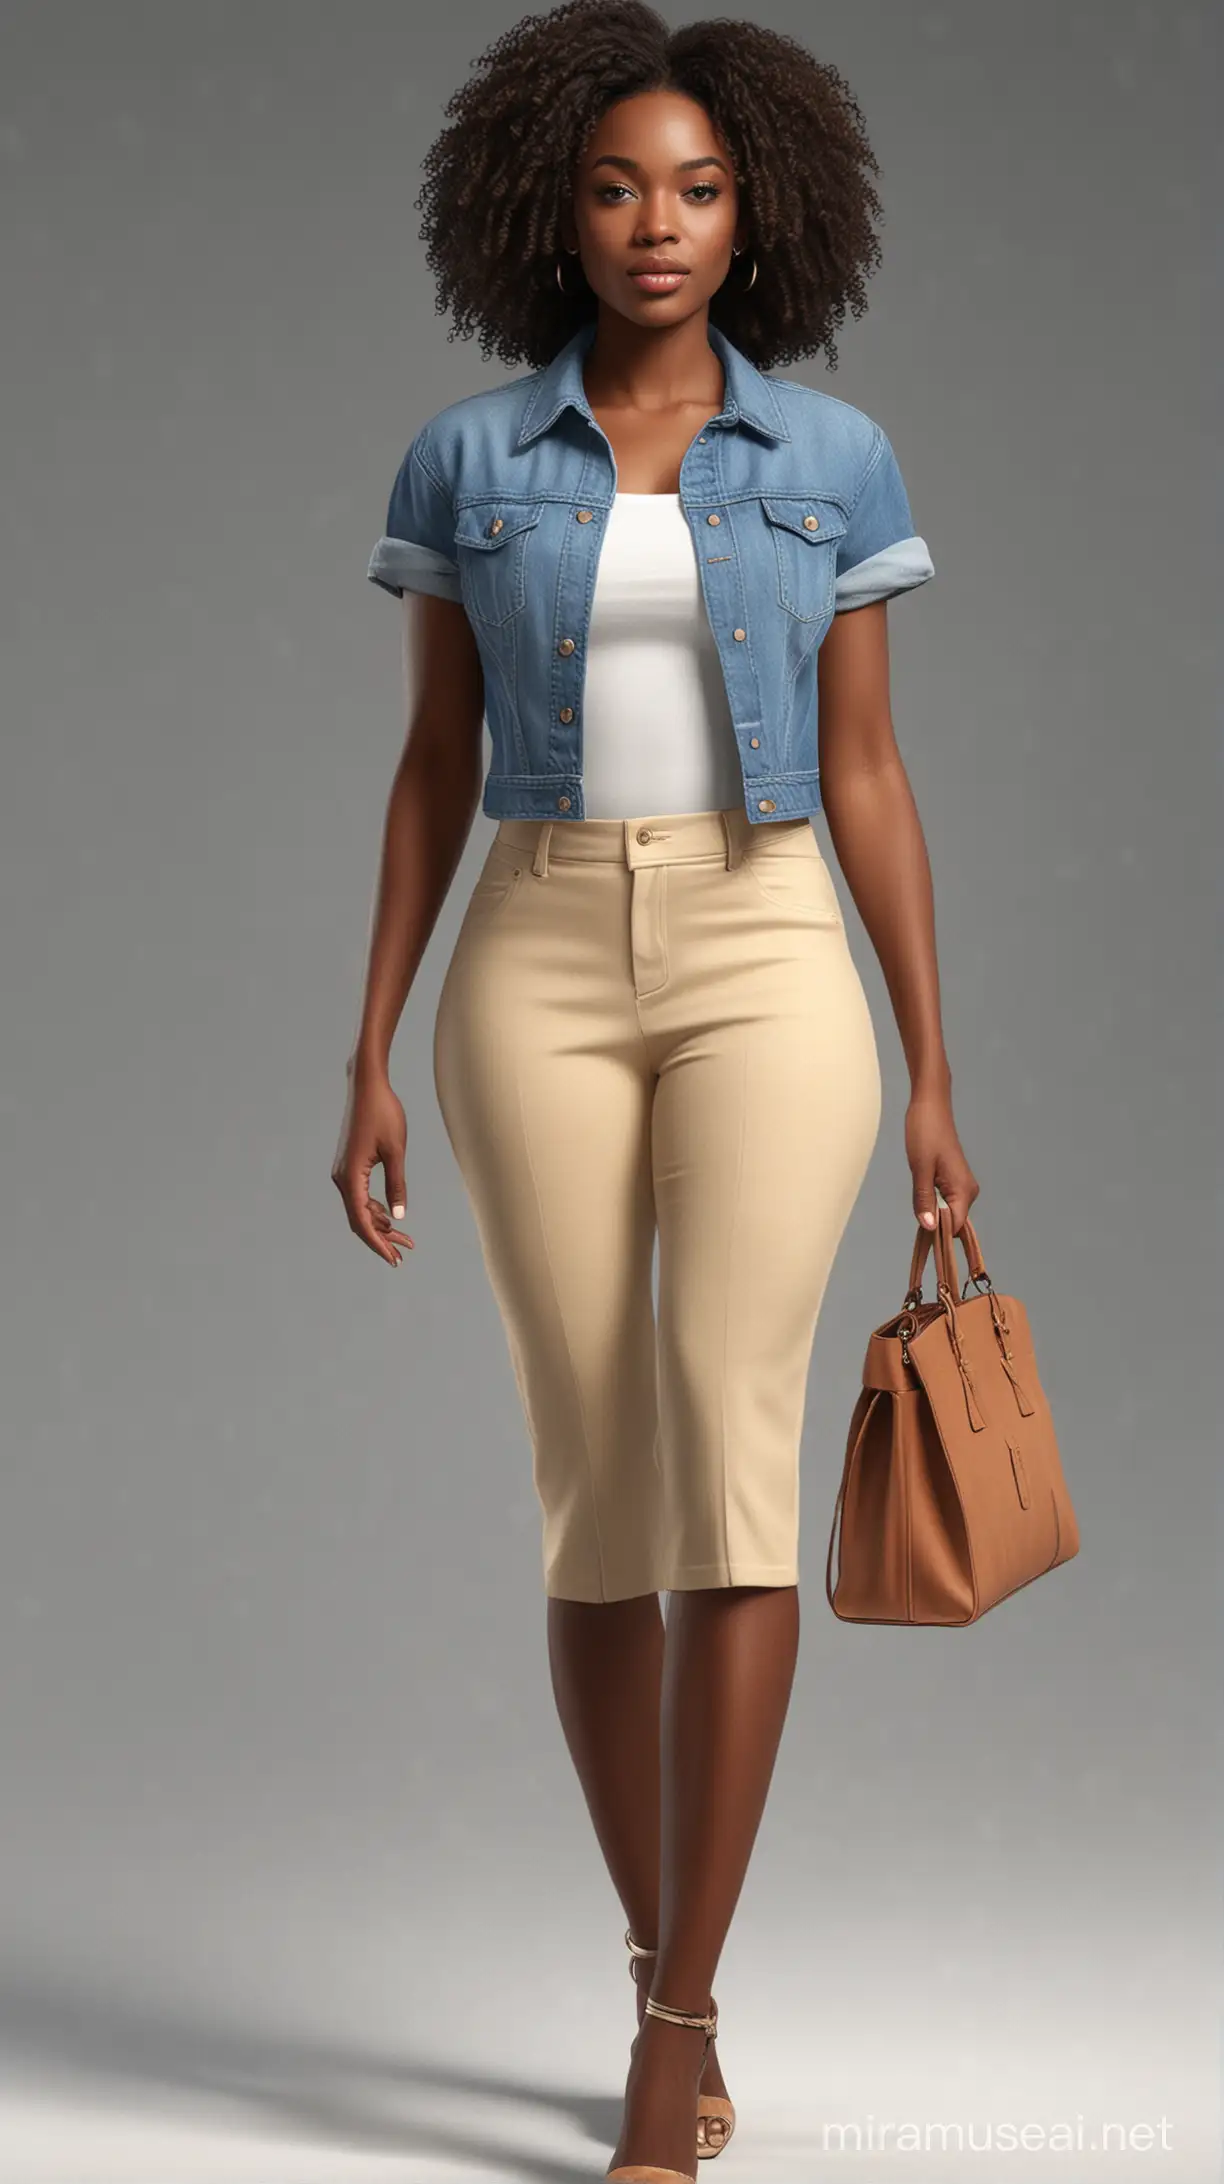 Stylish African American Women in Trendy Outfits Realistic Fashion Portraits